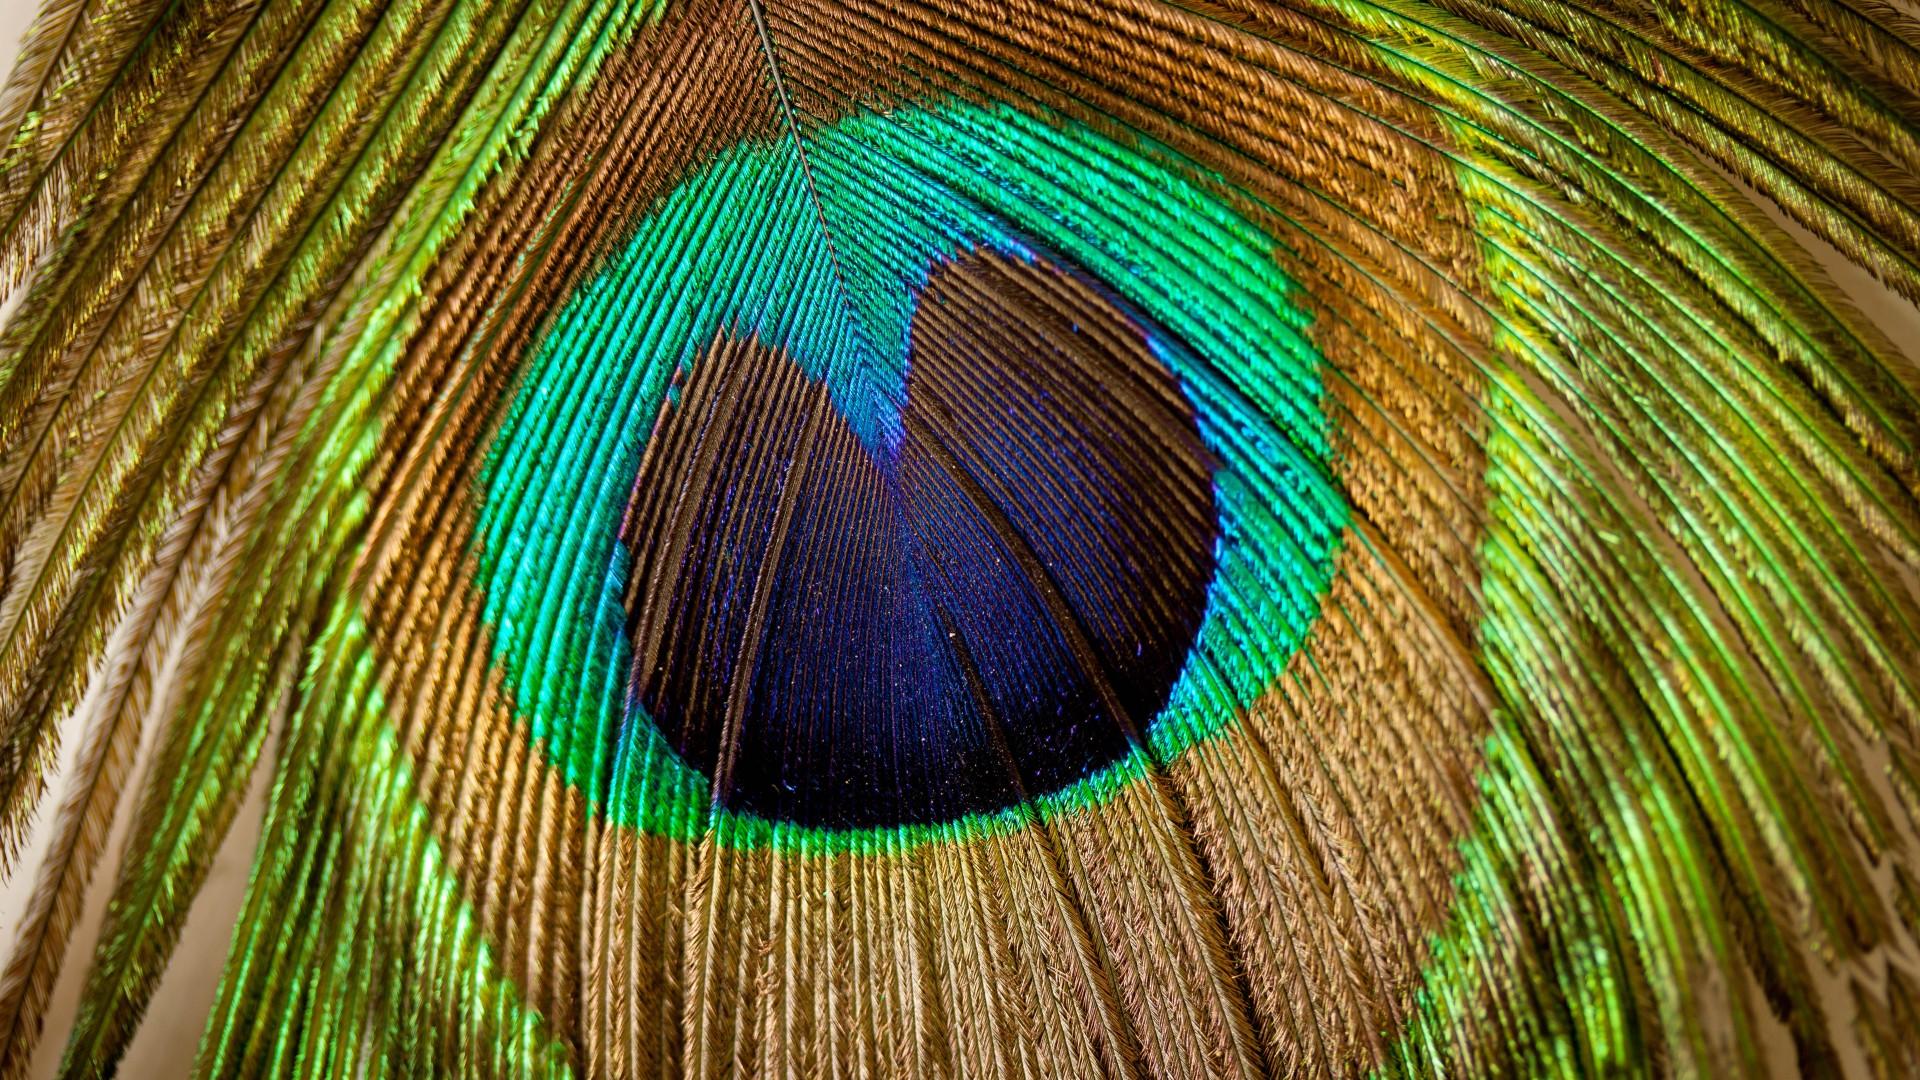 HD Peacock Feathers Wallpaper